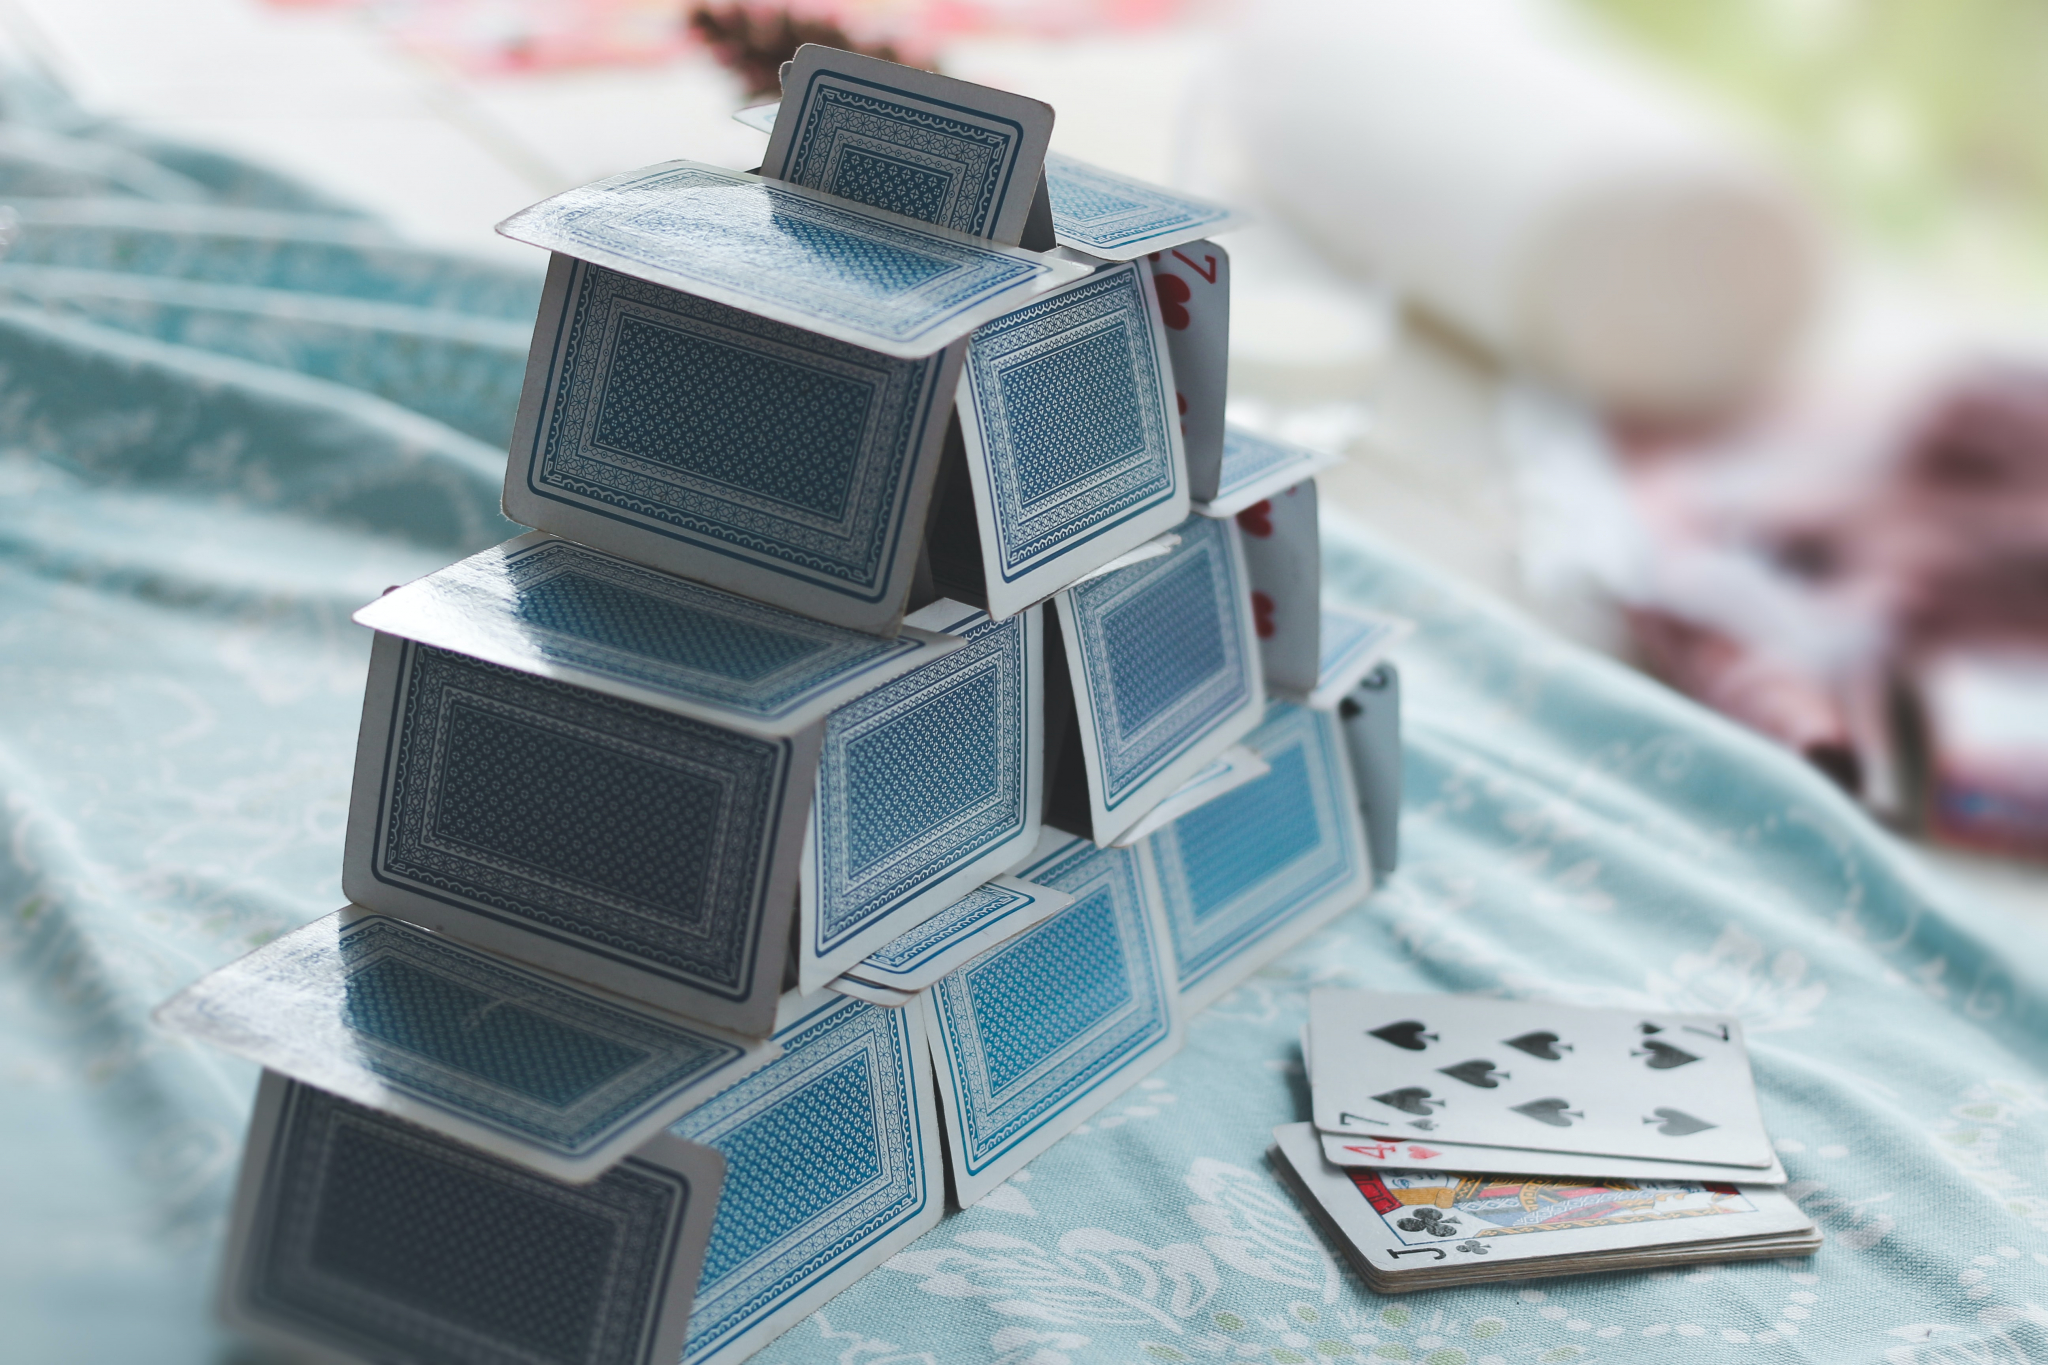 This house of cards represents the ripple effect of the five planes.